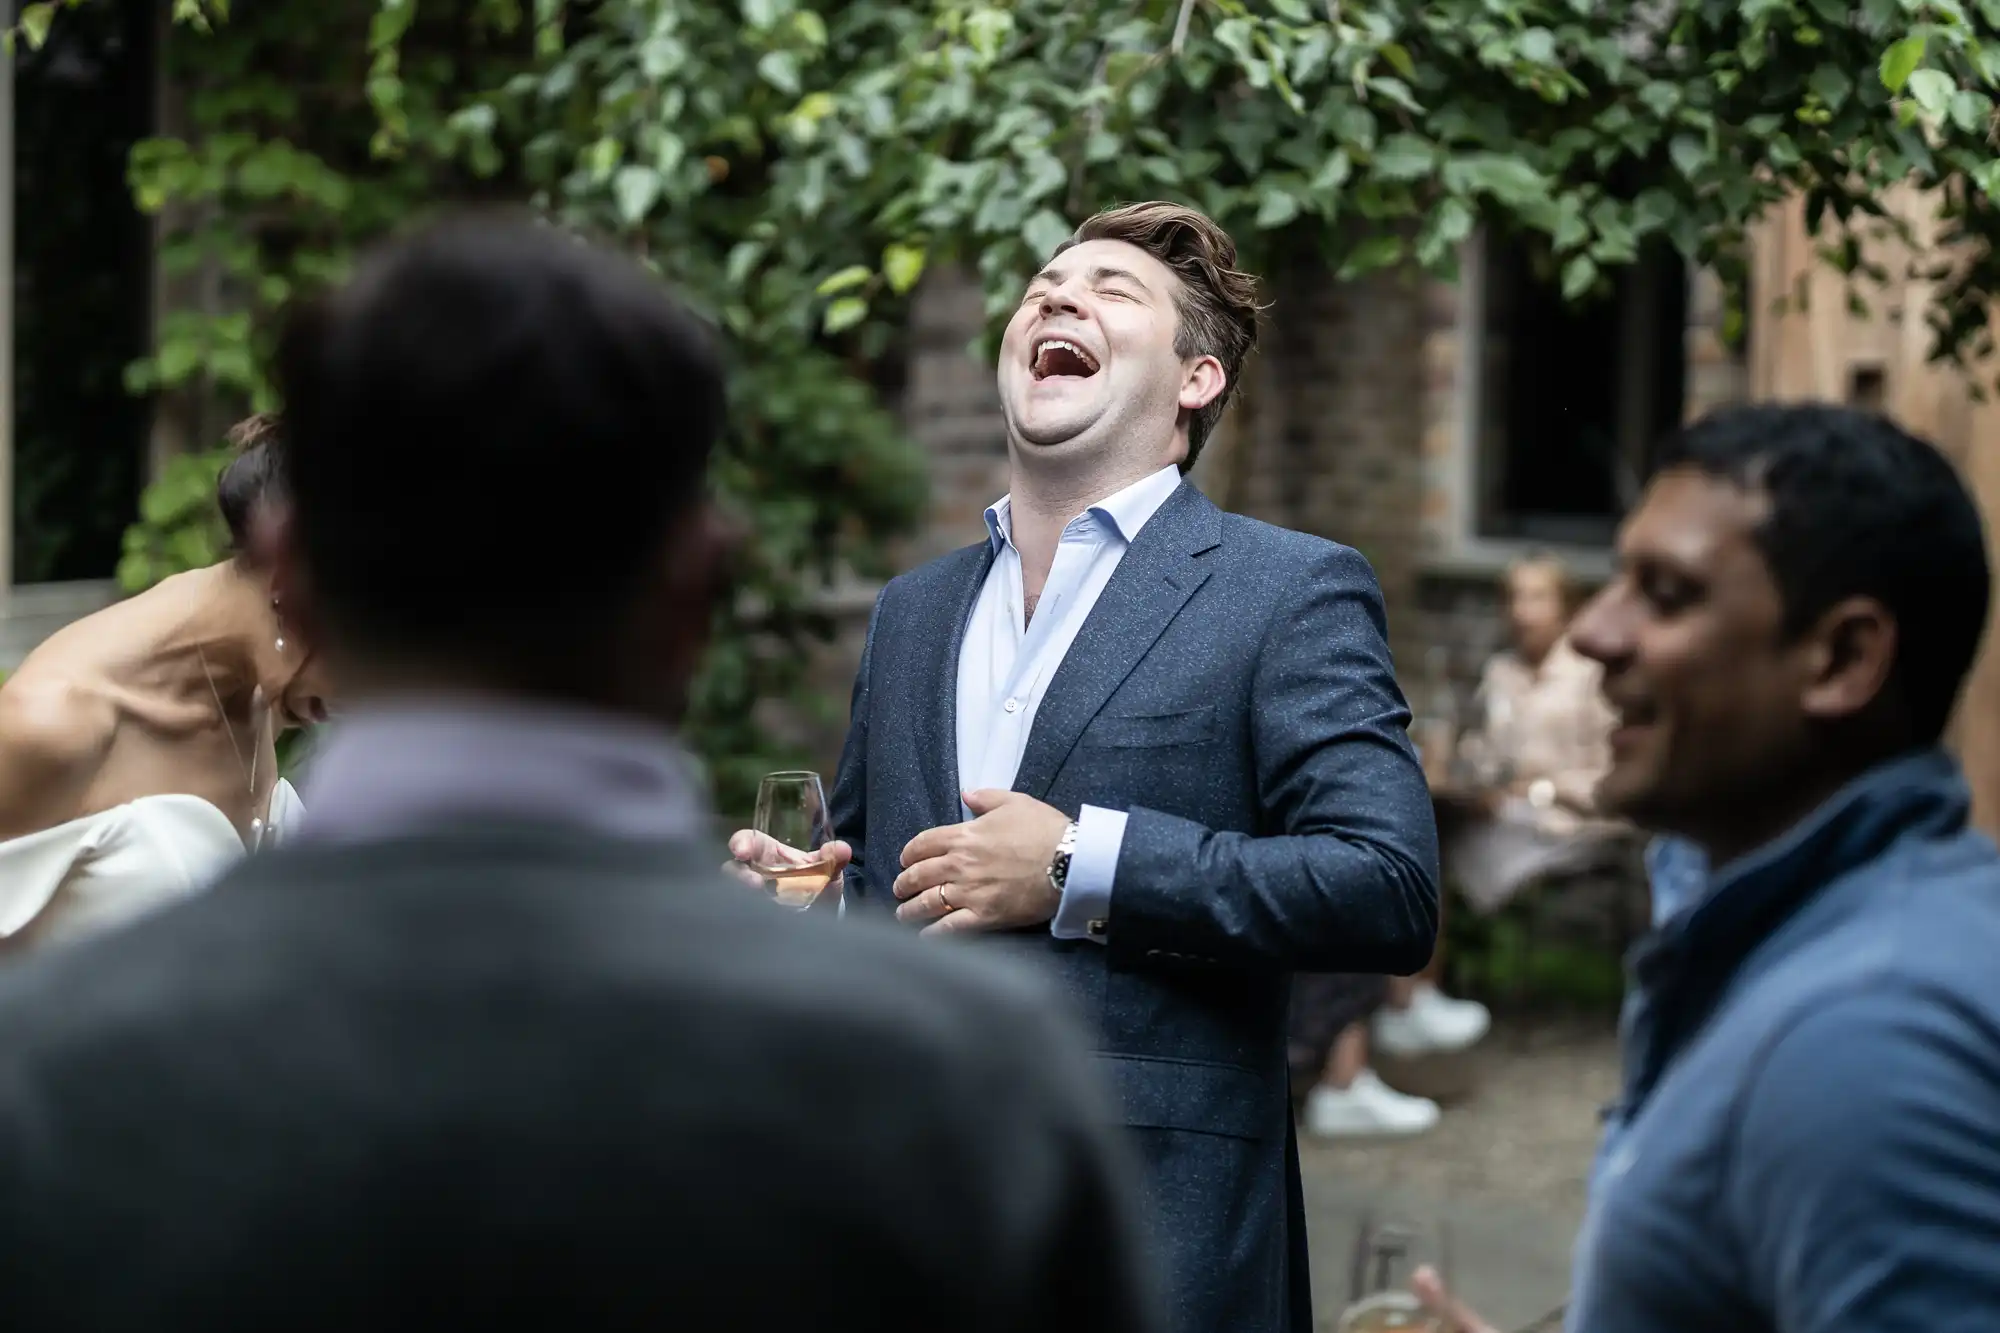 A man in a suit laughs joyfully while holding a wine glass at an outdoor gathering with other guests around him.